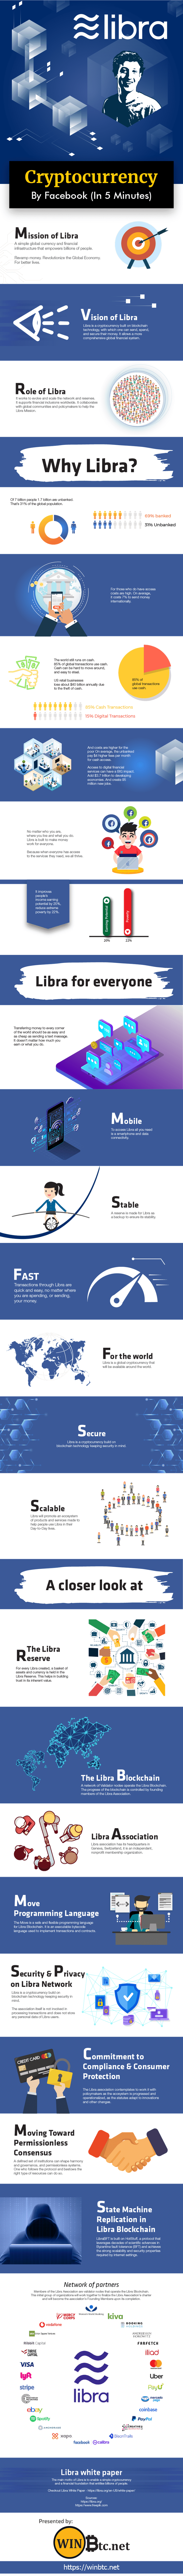 Libra Facebook Cryptocurrency | Infographic